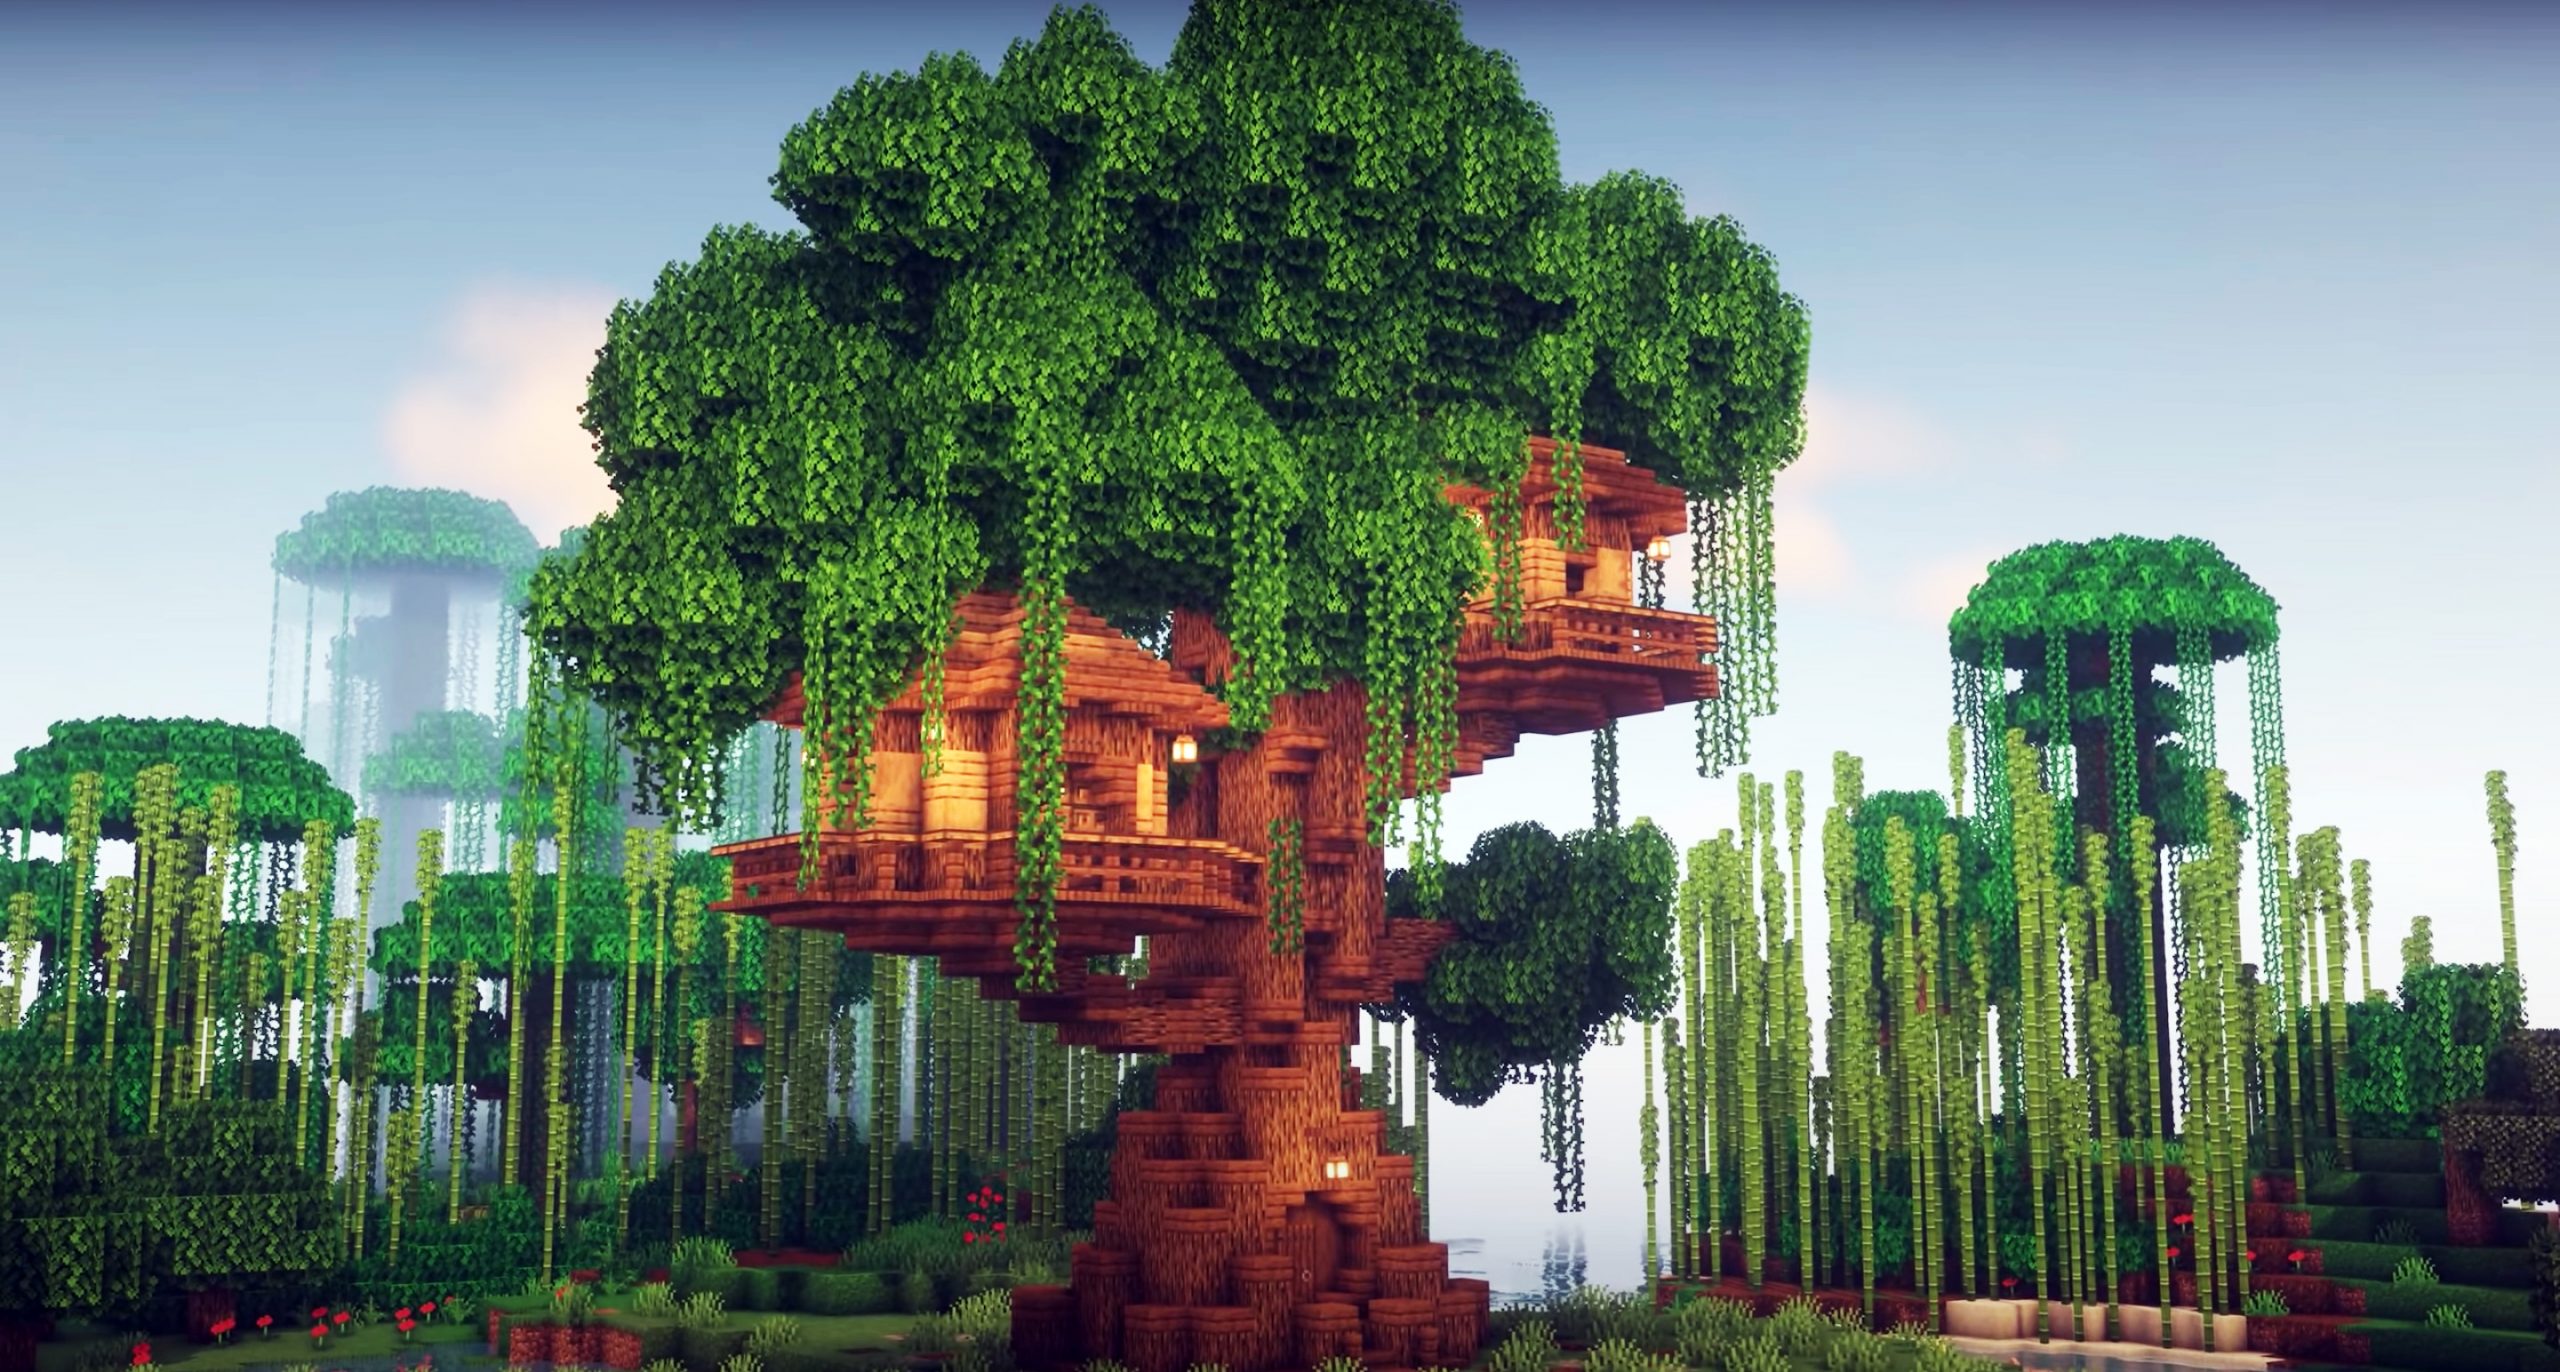 Minecraft Building Ideas: 52 Cool Ways to Get Inspired!